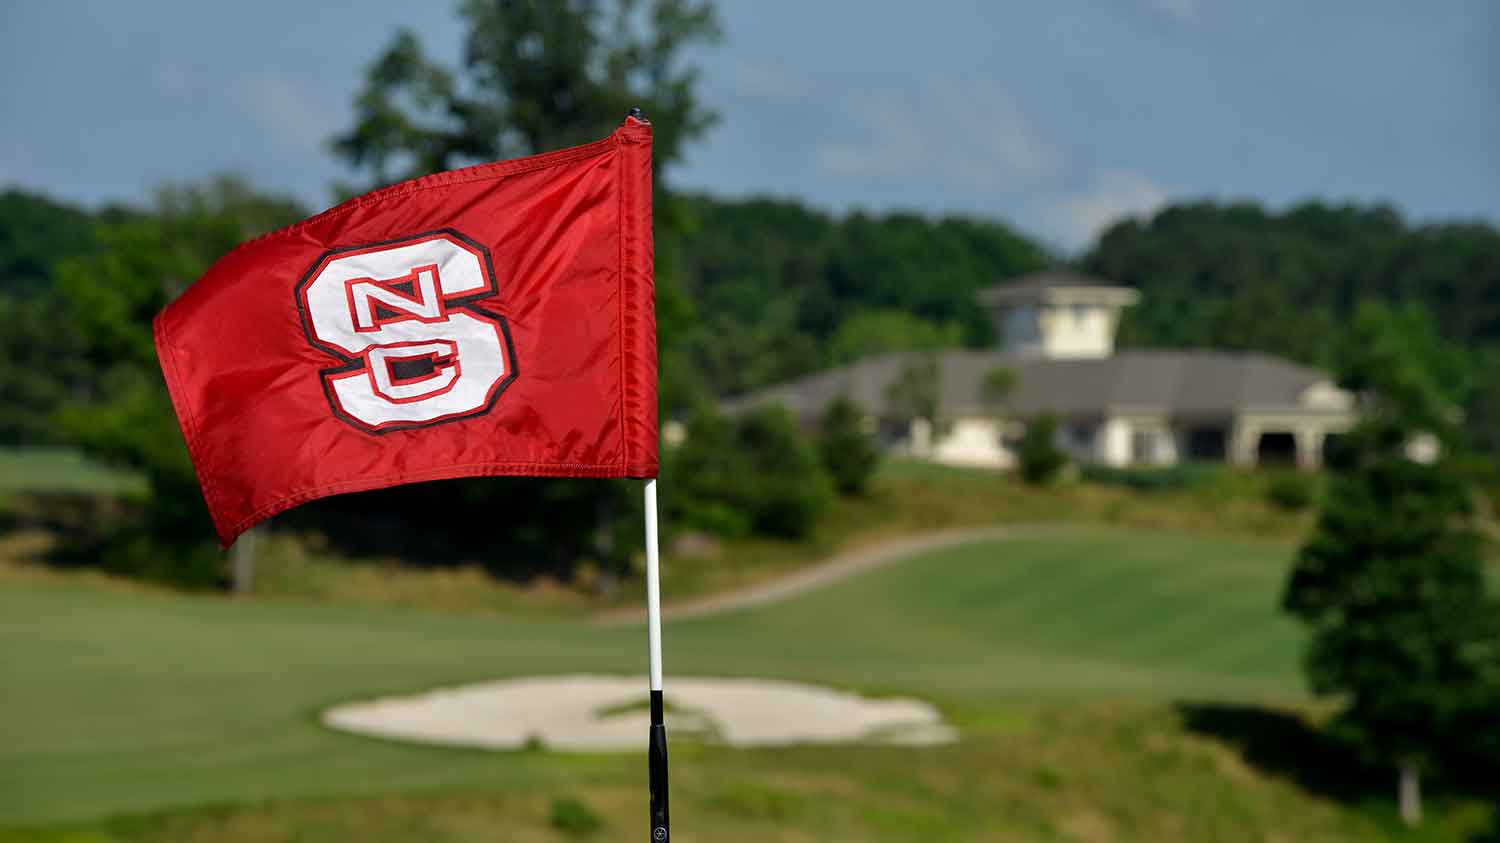 NC State flag at Lonnie Poole Golf Course